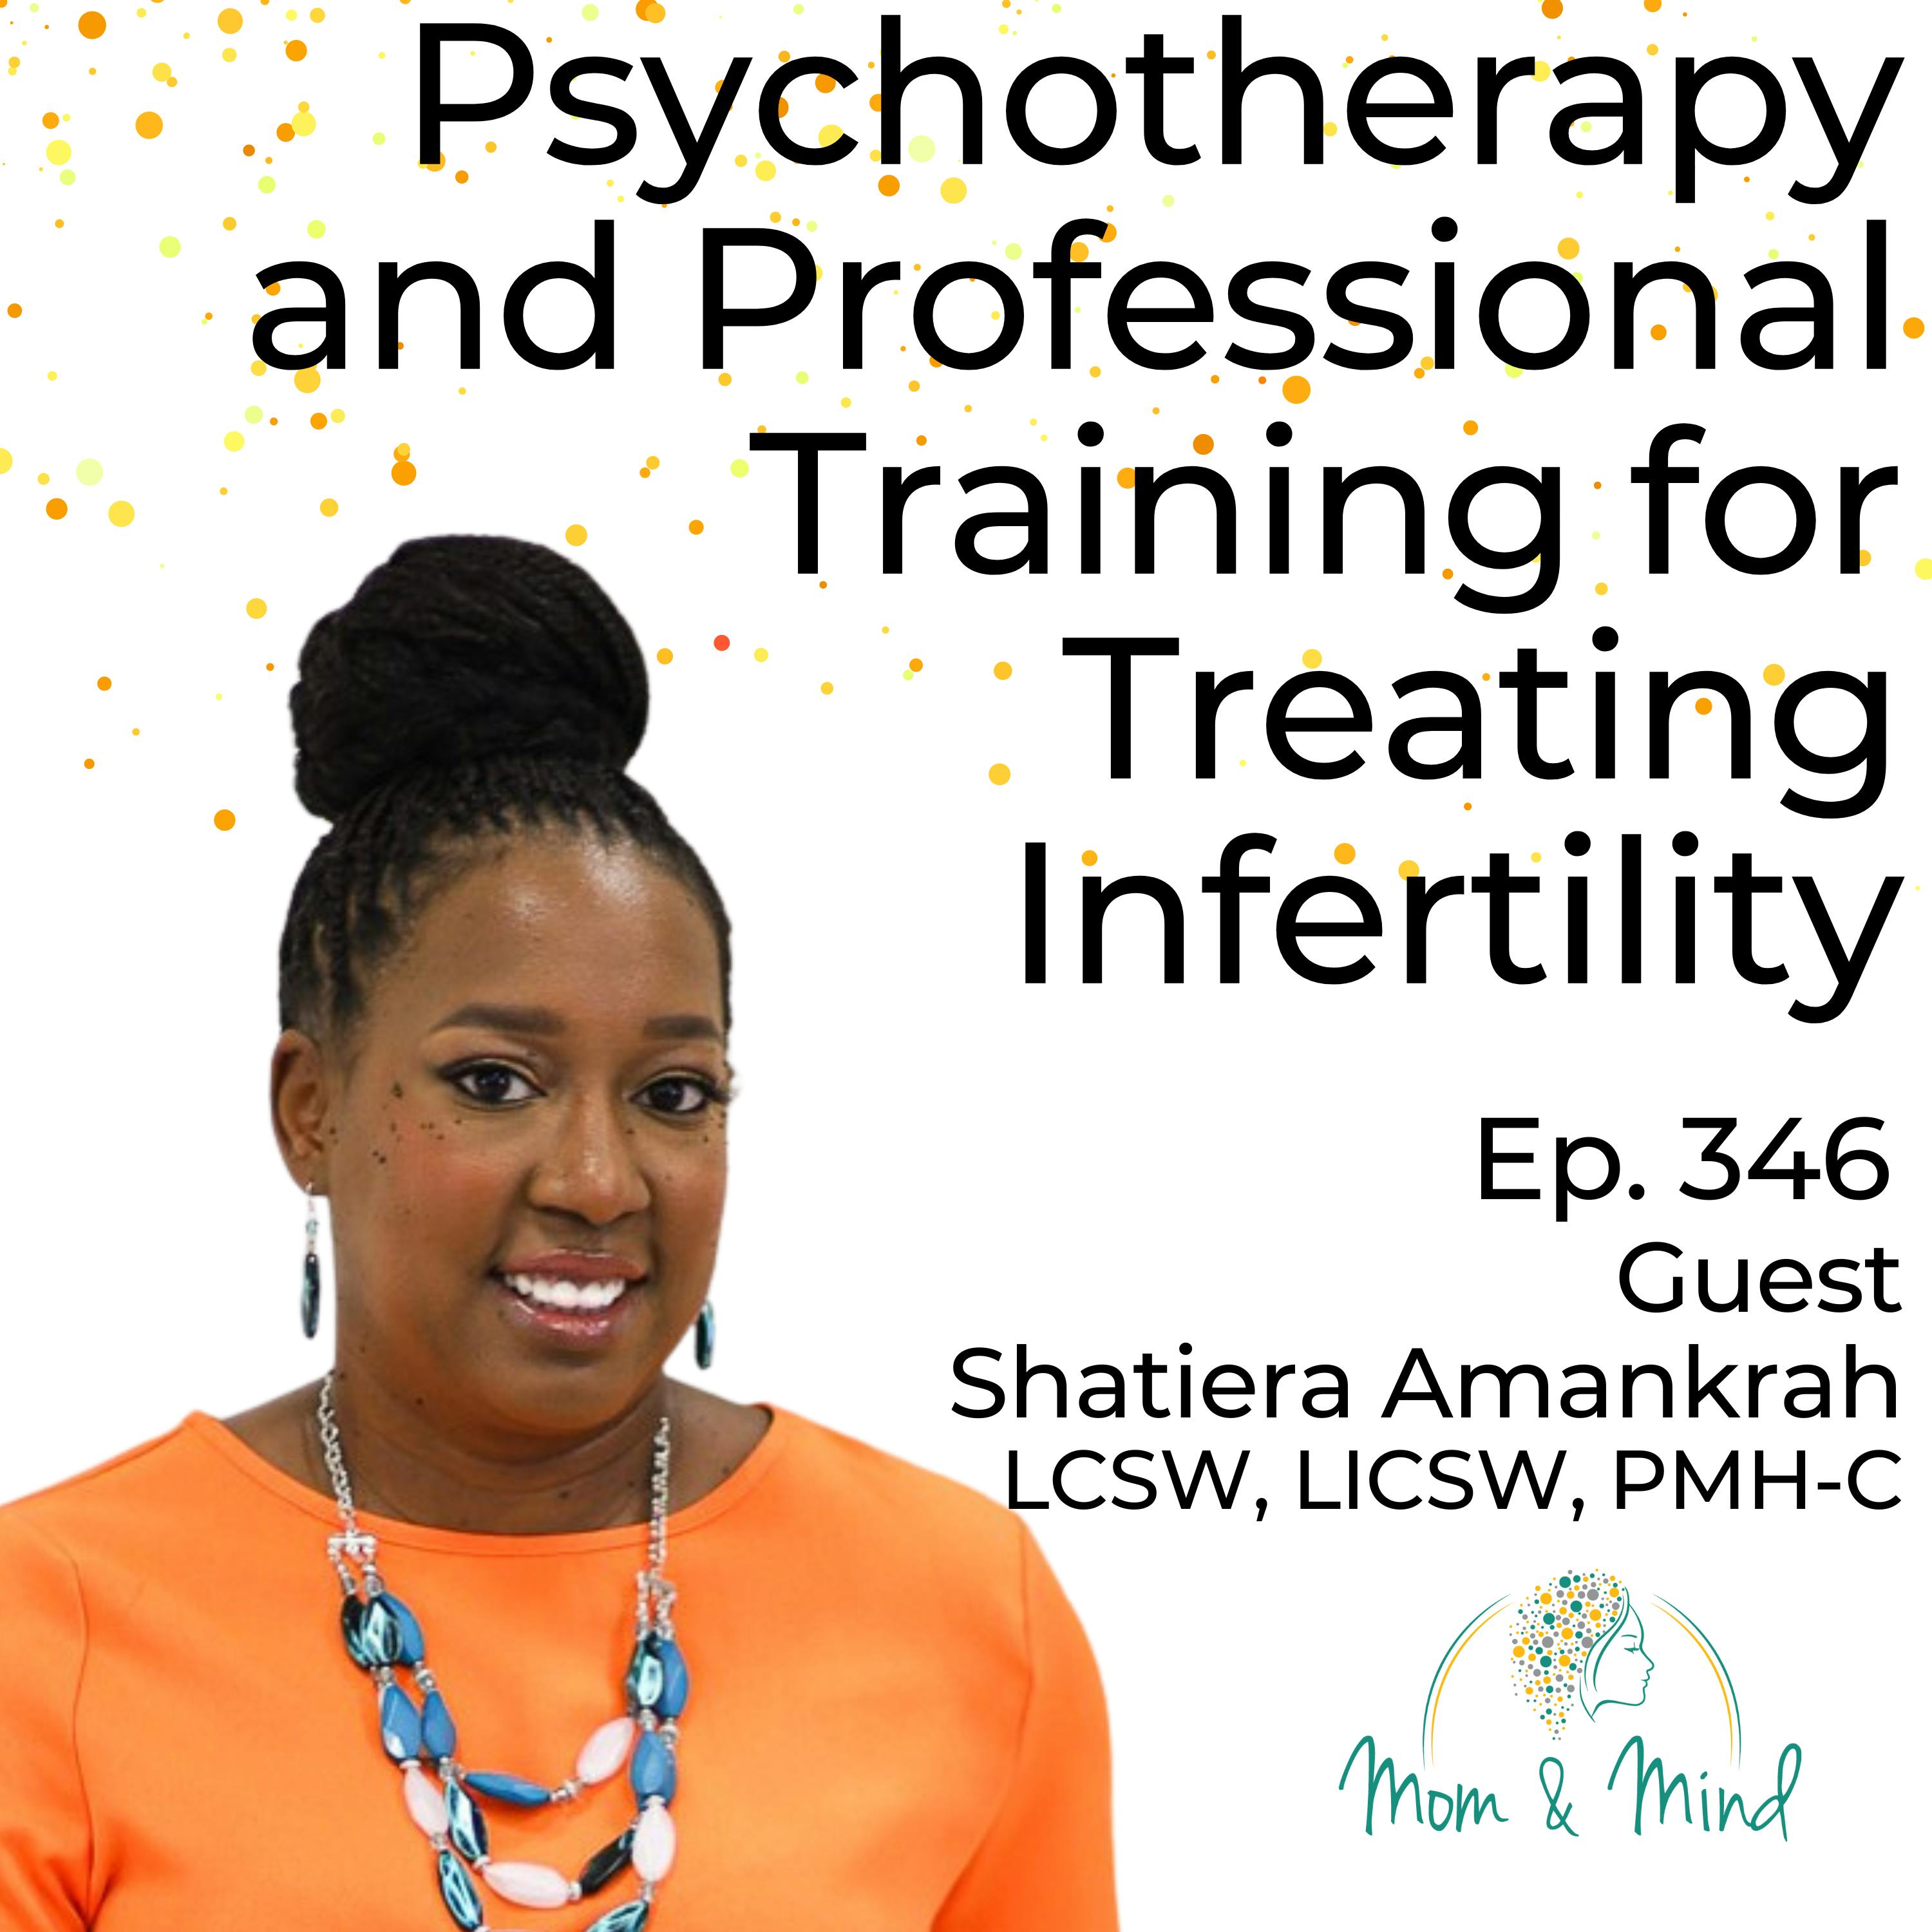 346: Psychotherapy and Professional Training for Treating Infertility with Shatiera Amankrah, LCSW, LICSW, PMH-C